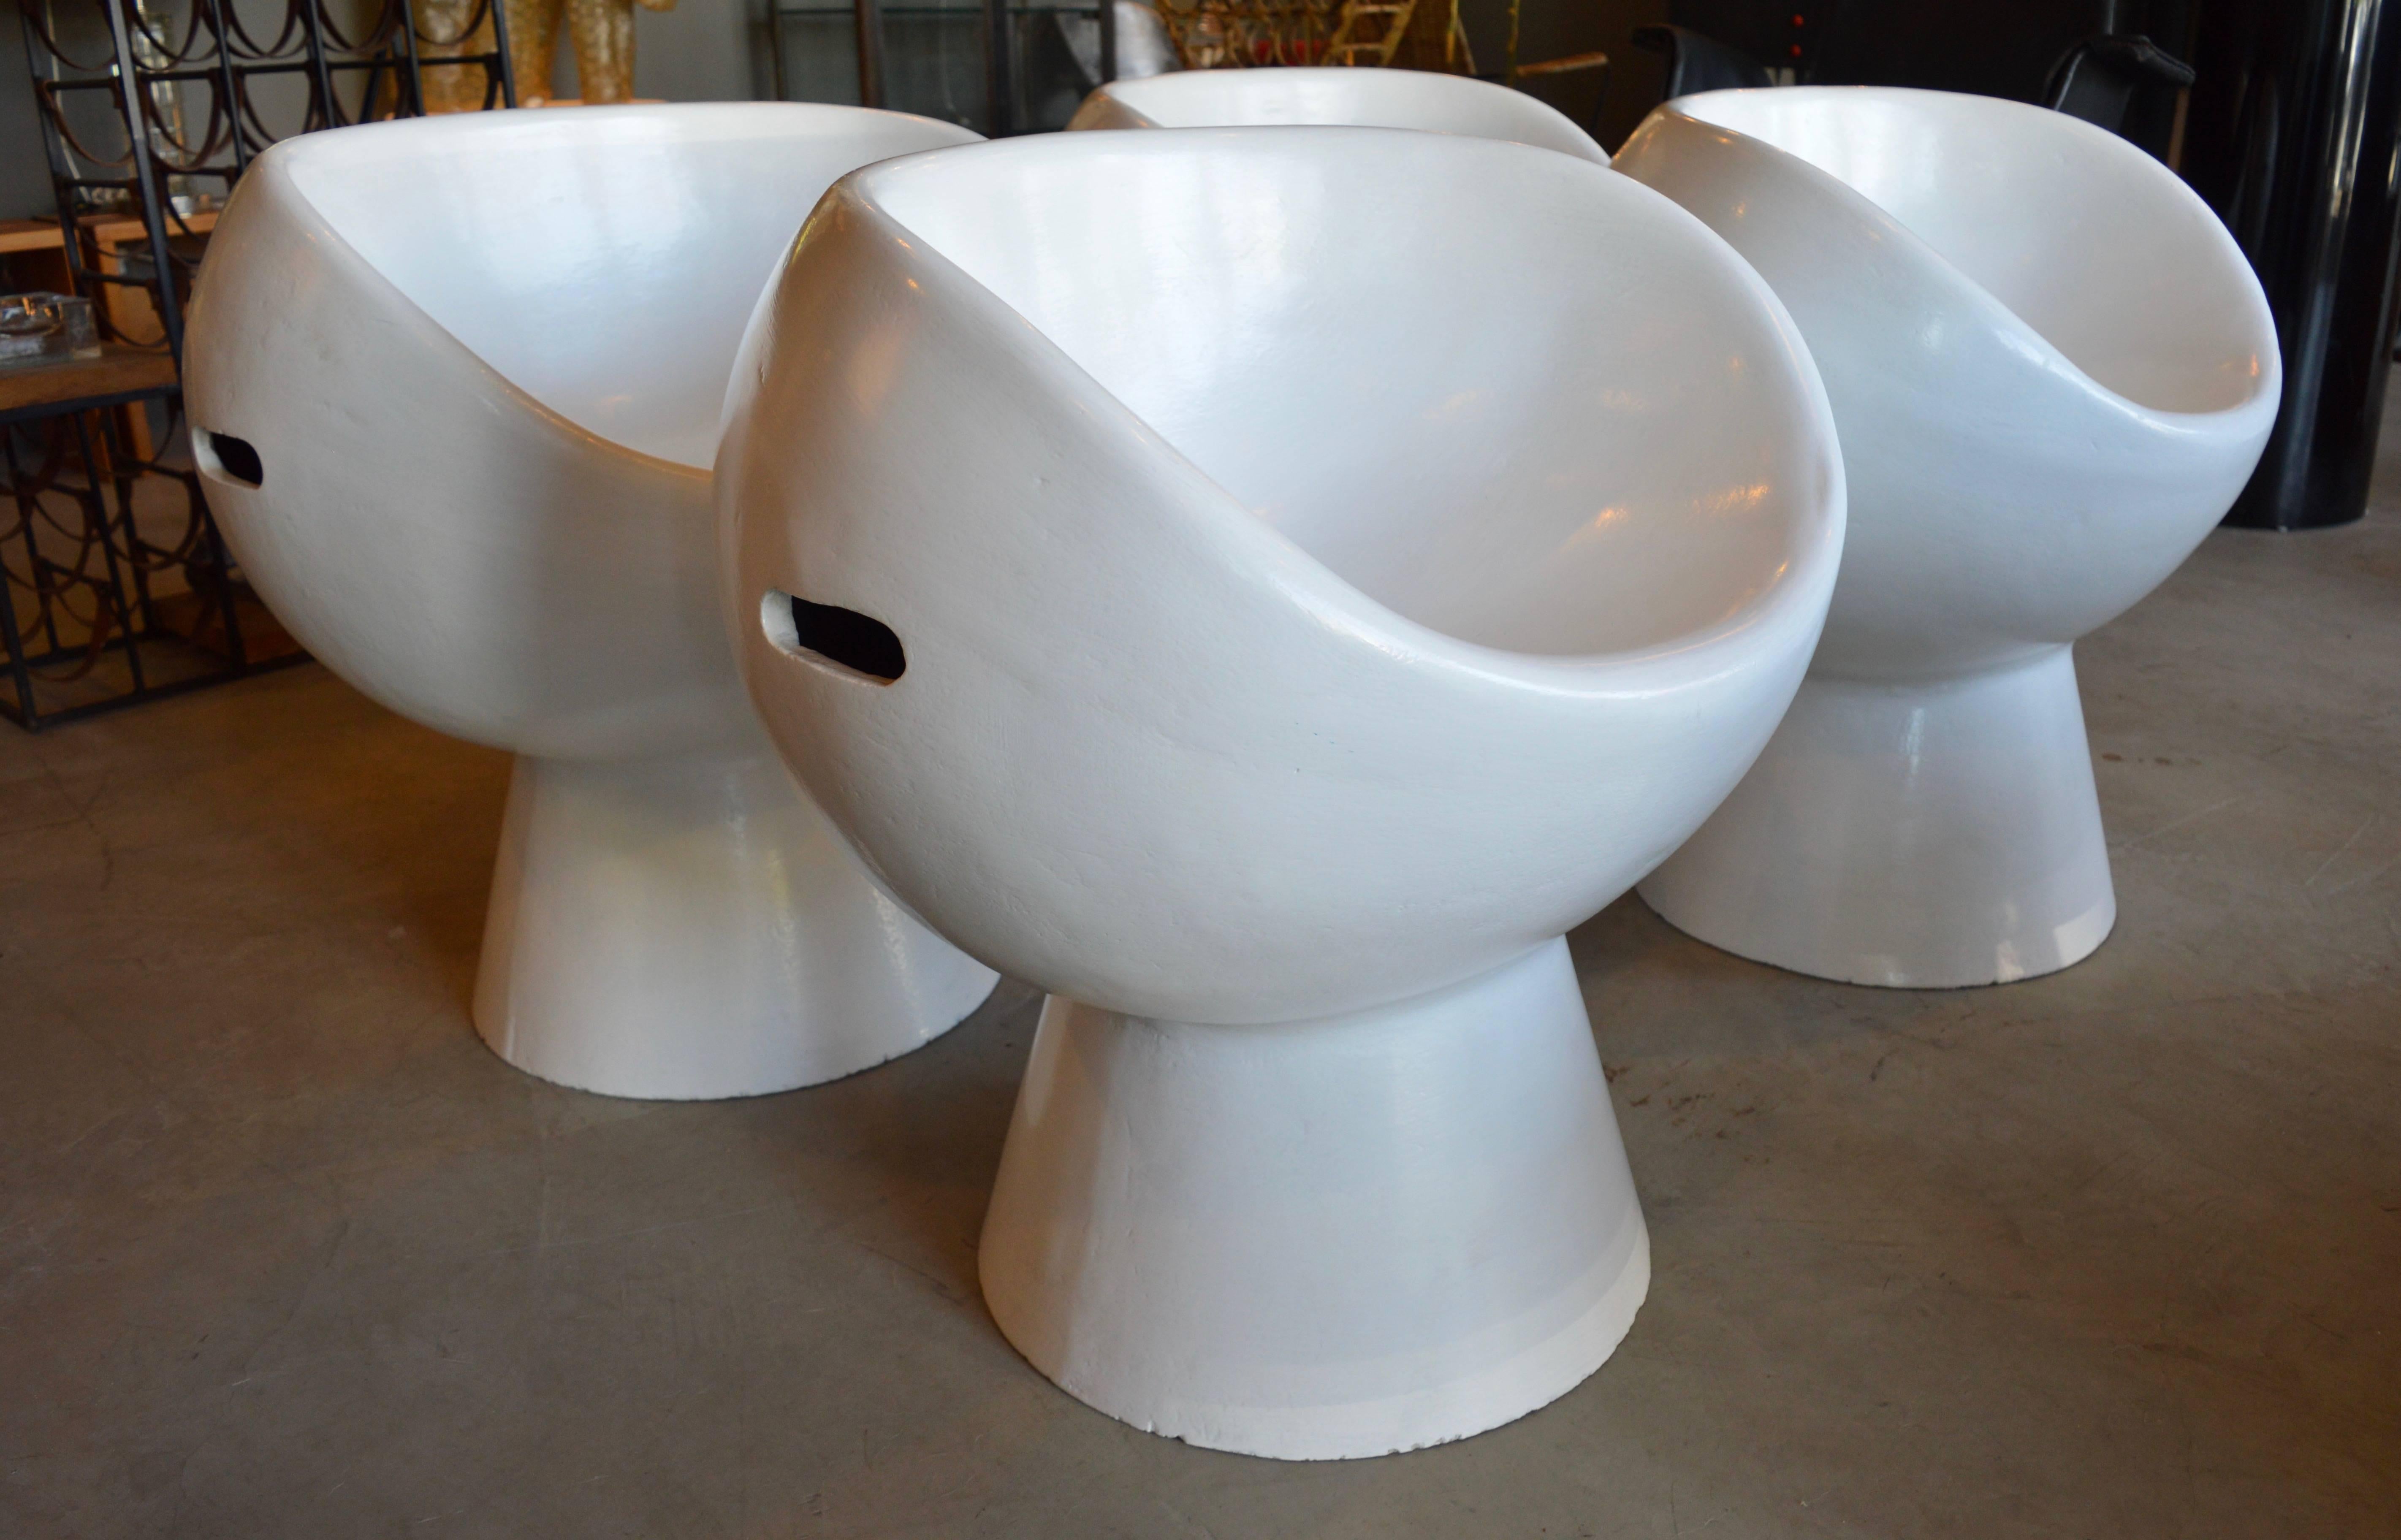 Amazing set of five concrete mushroom chairs by Swiss Architect Willy Guhl. Made for Eternit in the 1960s. This is a very rare set of chairs that seldom become available for sale. Amazing condition. Perfect indoors or outside! Sold as a set of 5. 